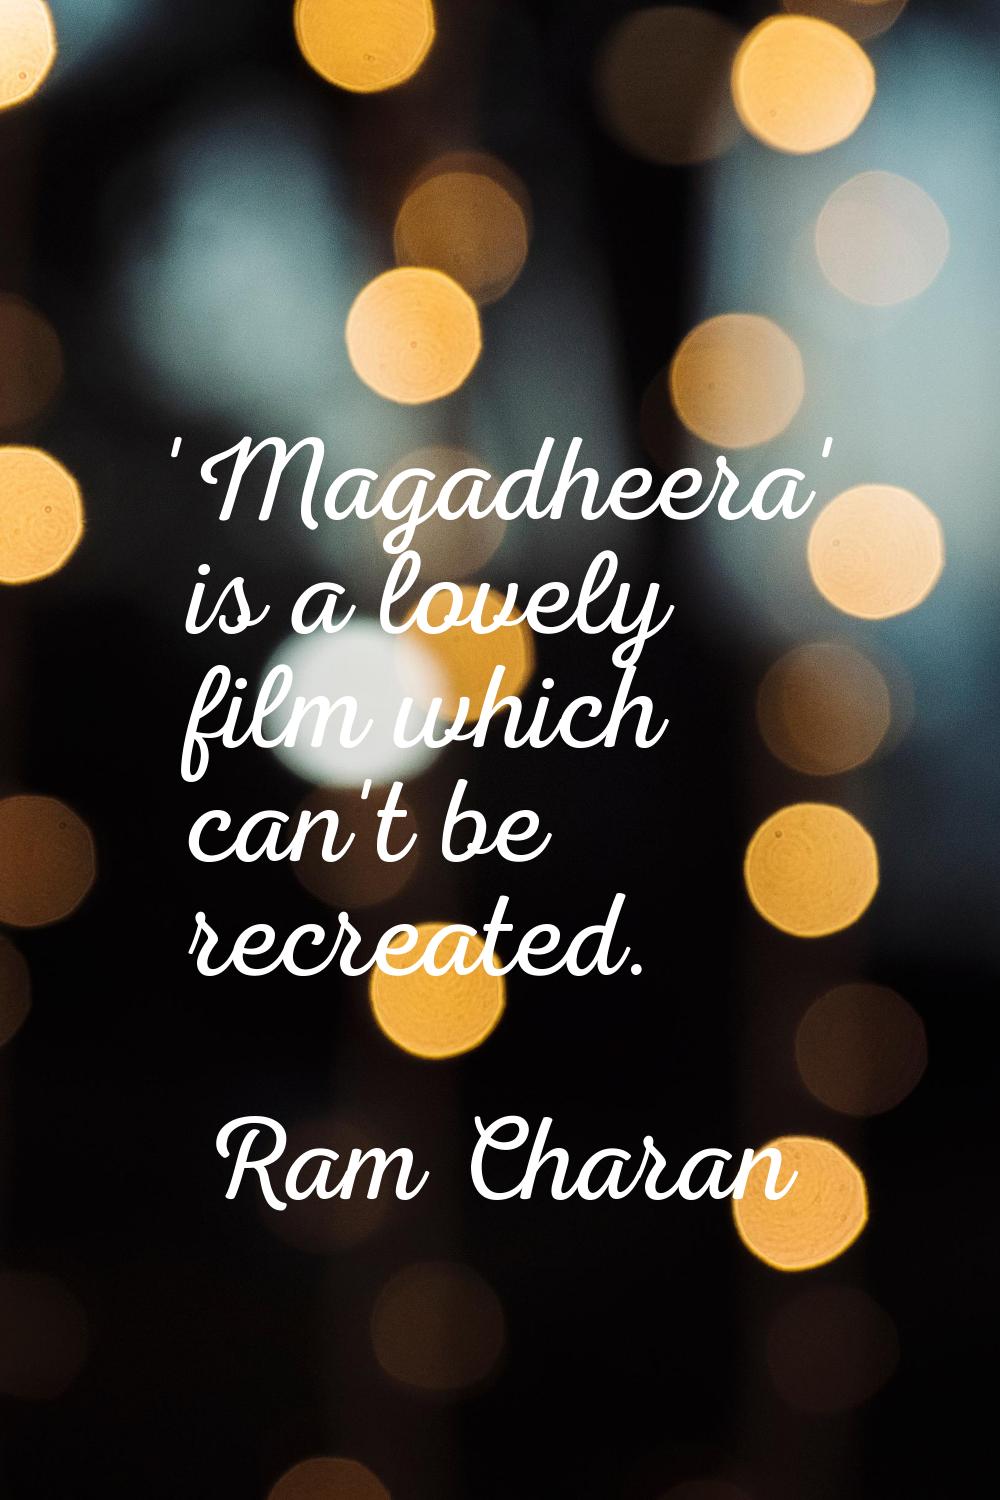 'Magadheera' is a lovely film which can't be recreated.